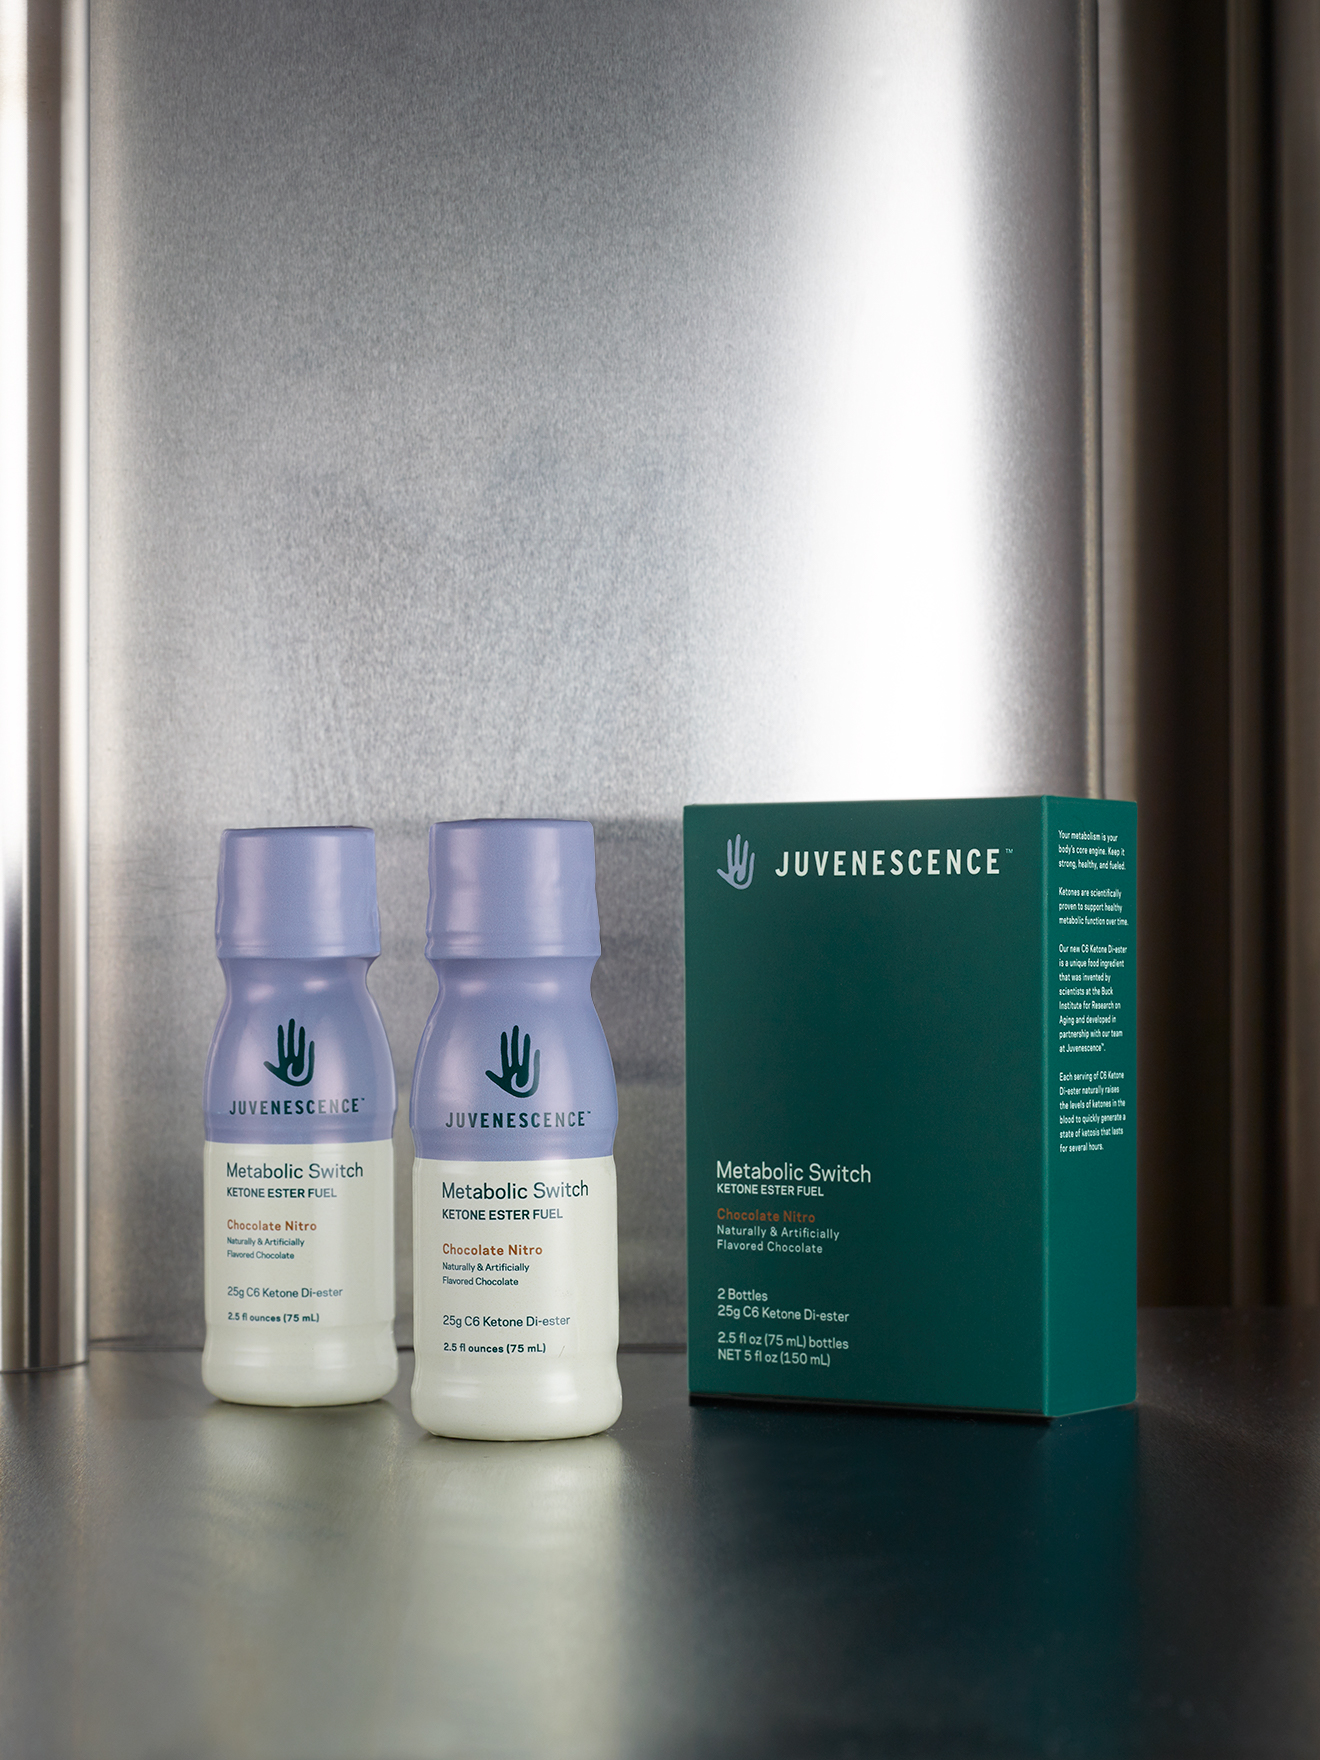 Juvenescence Debuts New Product to Aid in Supporting a 